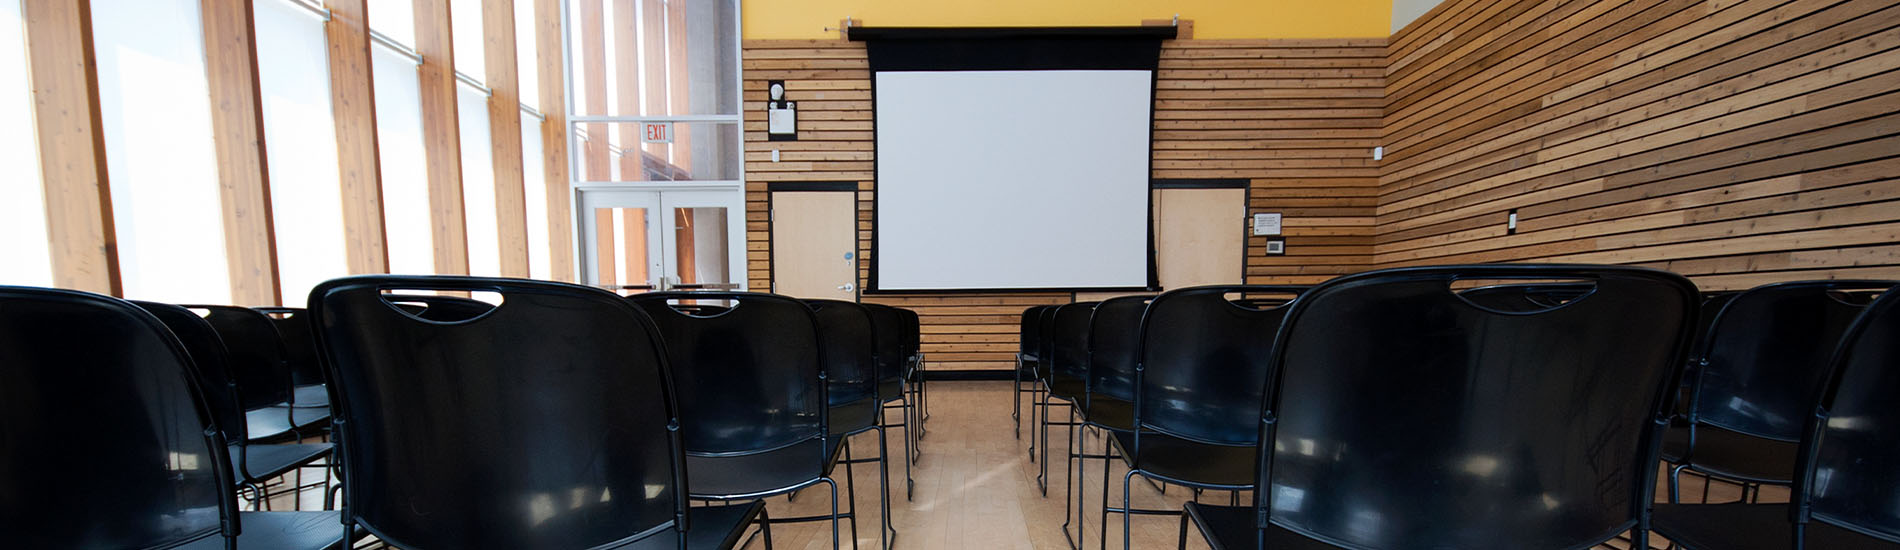 Conference-room-at-NENA-expo-that-is-empty-with-a-lot-of-black-chairs-and-lined-up-to-listen-to-next-gen-9-1-1-presentation-on-blank-white-screen